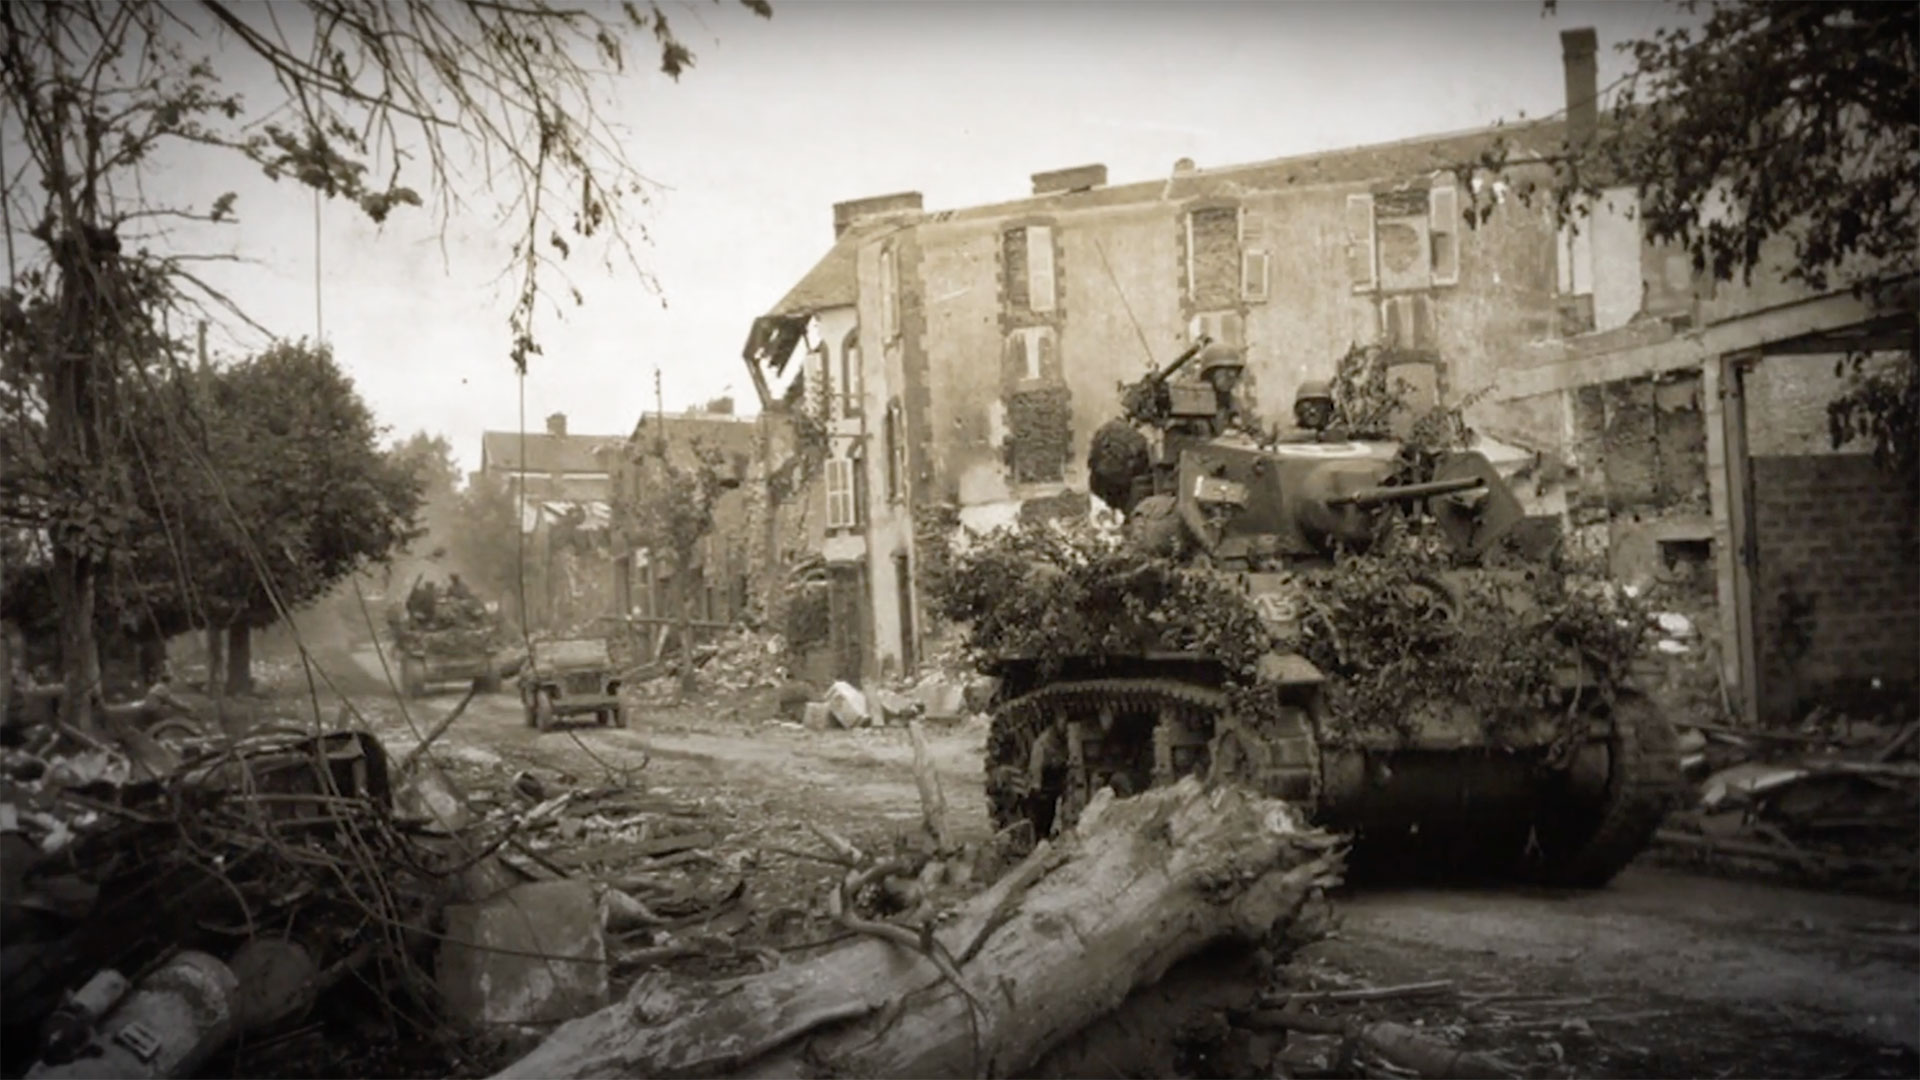 A U.S. M5 Stuart light tank advancing through a French town in the Bocage region. Note the foliage added to the tank by the crew to help make it less visible in the hedgerows.